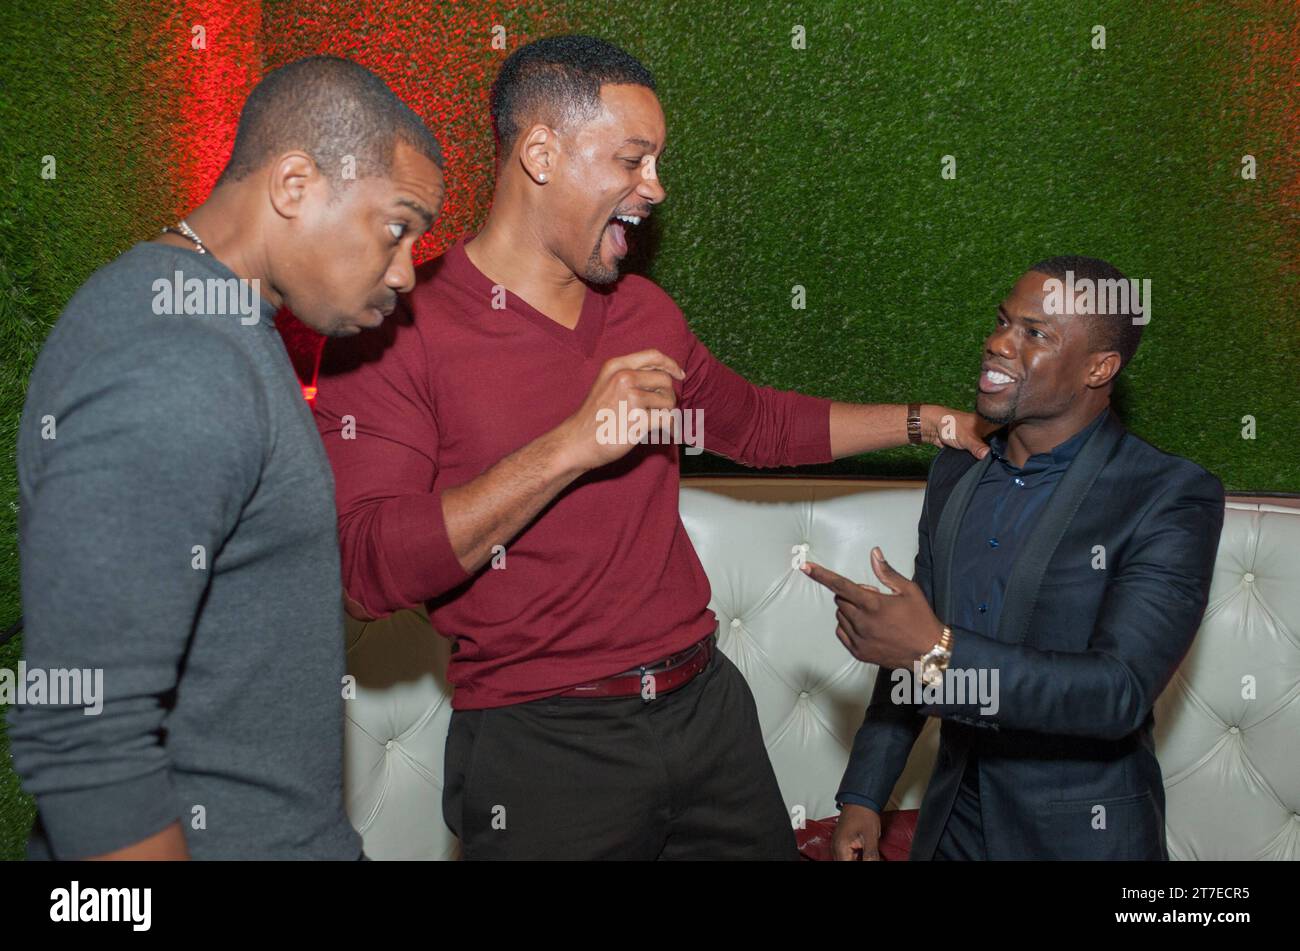 HOLLYWOOD, CA - JAN 25 :L-R Duane Martin,Will Smith and Kevin Hart at NE-YO & Compound Entertainment 6th Annual Pre-Grammy Awards Midnight Brunch at Lure nightclub on January 25, 2014 in Hollywood, CA Copyright: xPGsidney/MediaPunch.x Stock Photo